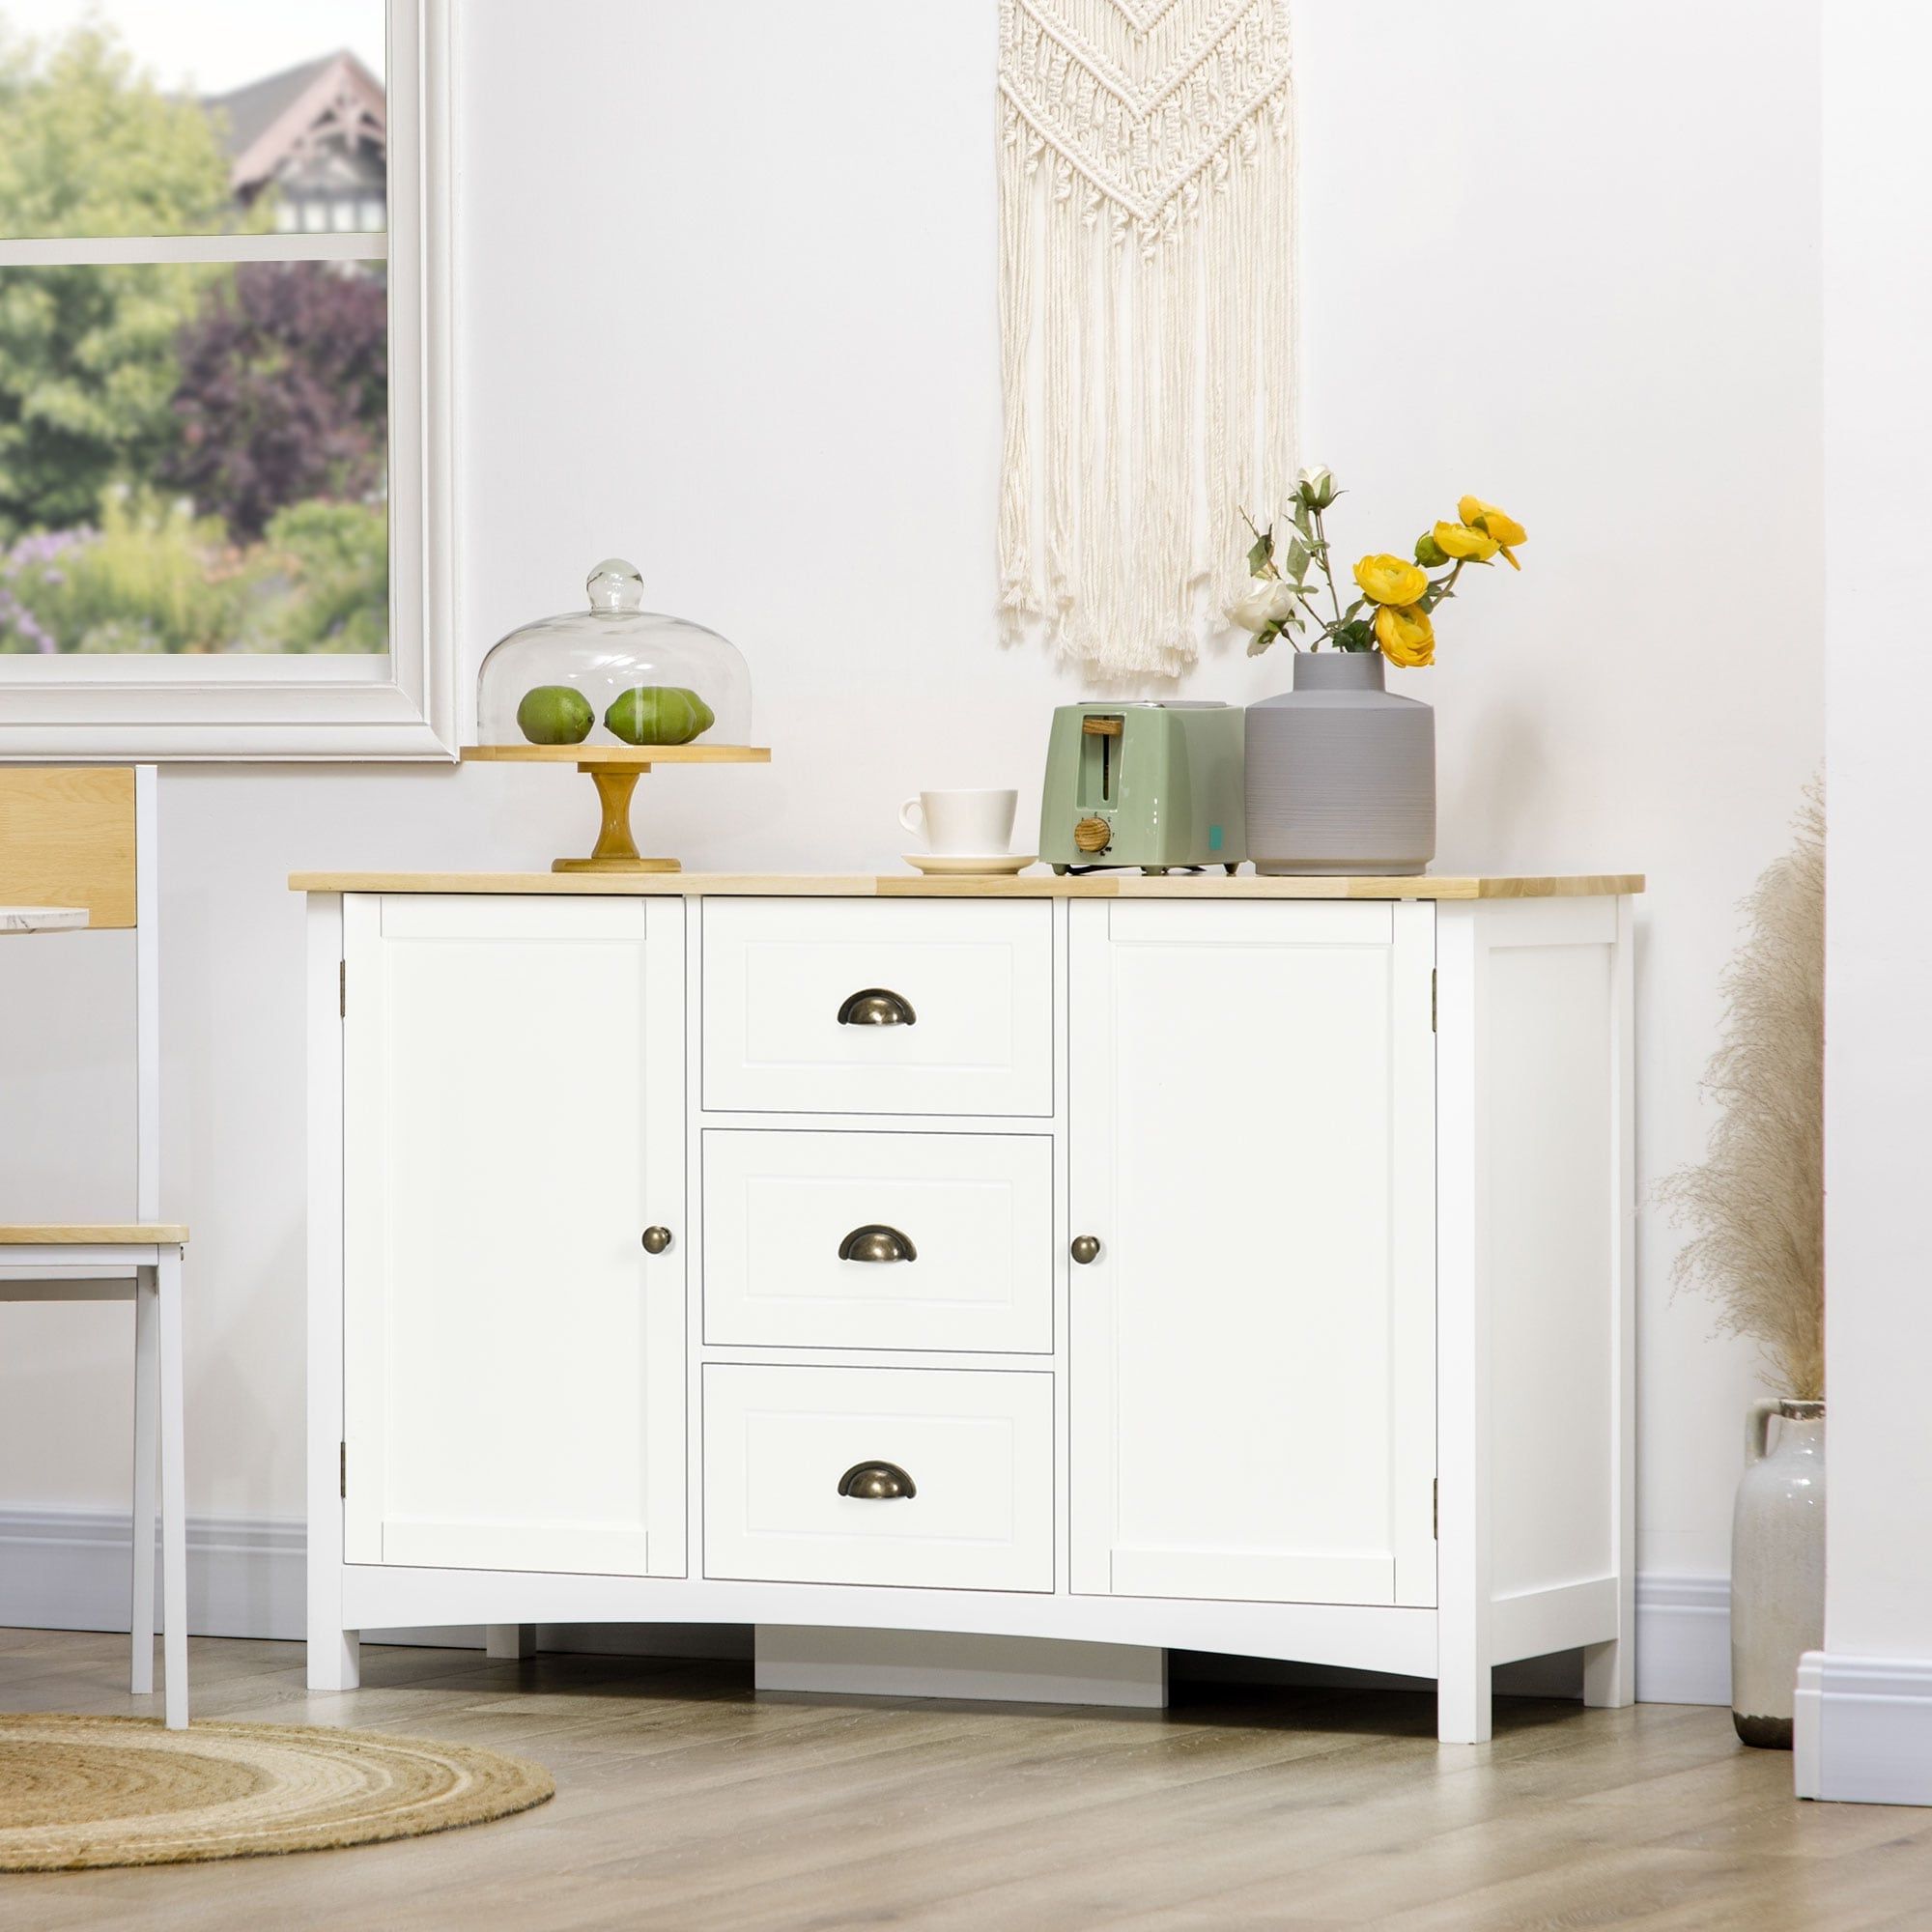 Homcom Sideboard Buffet Cabinet, Retro Kitchen Cabinet, Coffee Bar Cabinet  With Rubber Wood Top, Drawers, Entryway, Gray – Bed Bath & Beyond – 38858360 Regarding Sideboards With Rubberwood Top (Gallery 20 of 20)